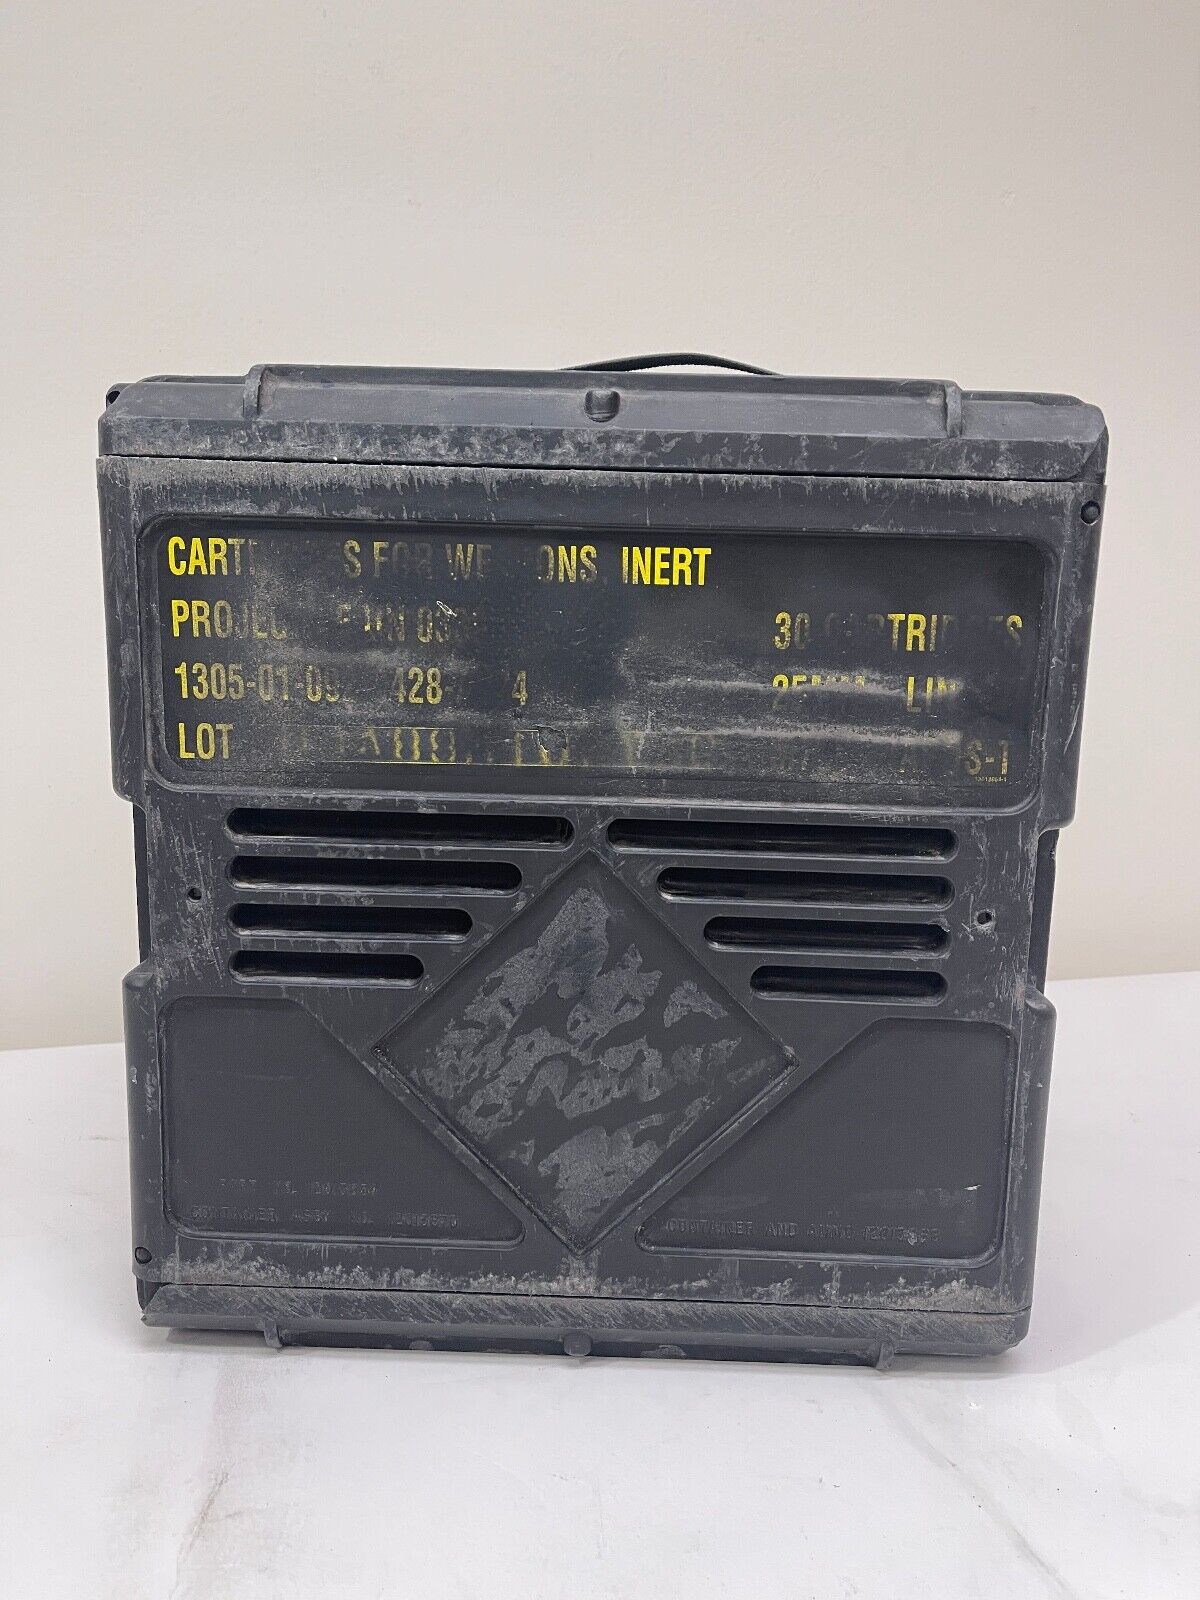 U.S. Armed Forces 25mm Linked Plastic Ammo Can - Used